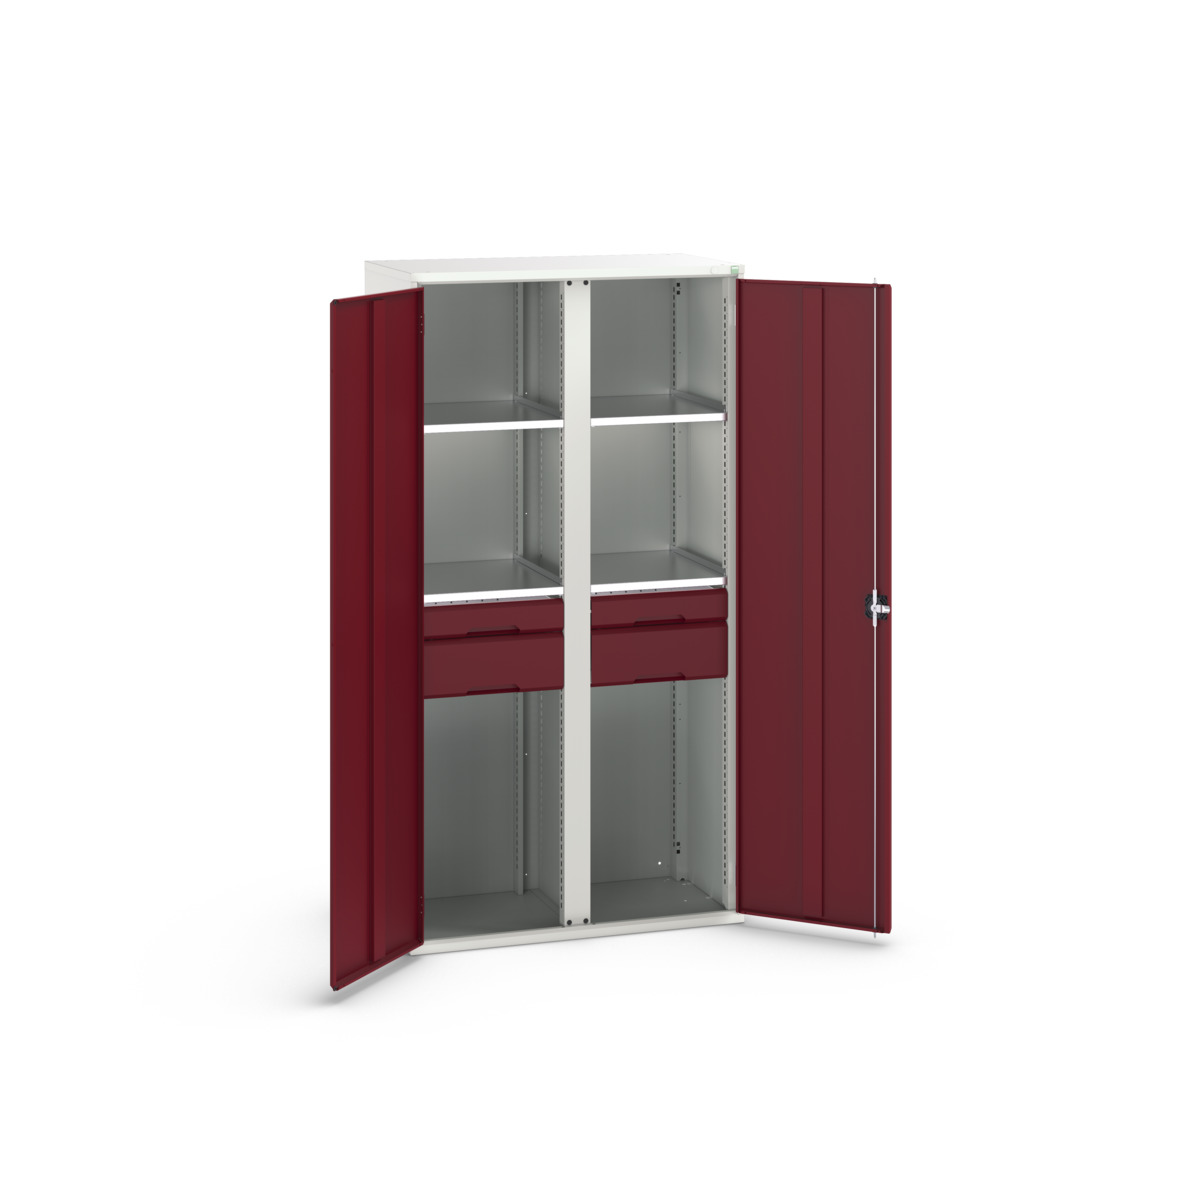 16926582.24 - verso kitted cupboard